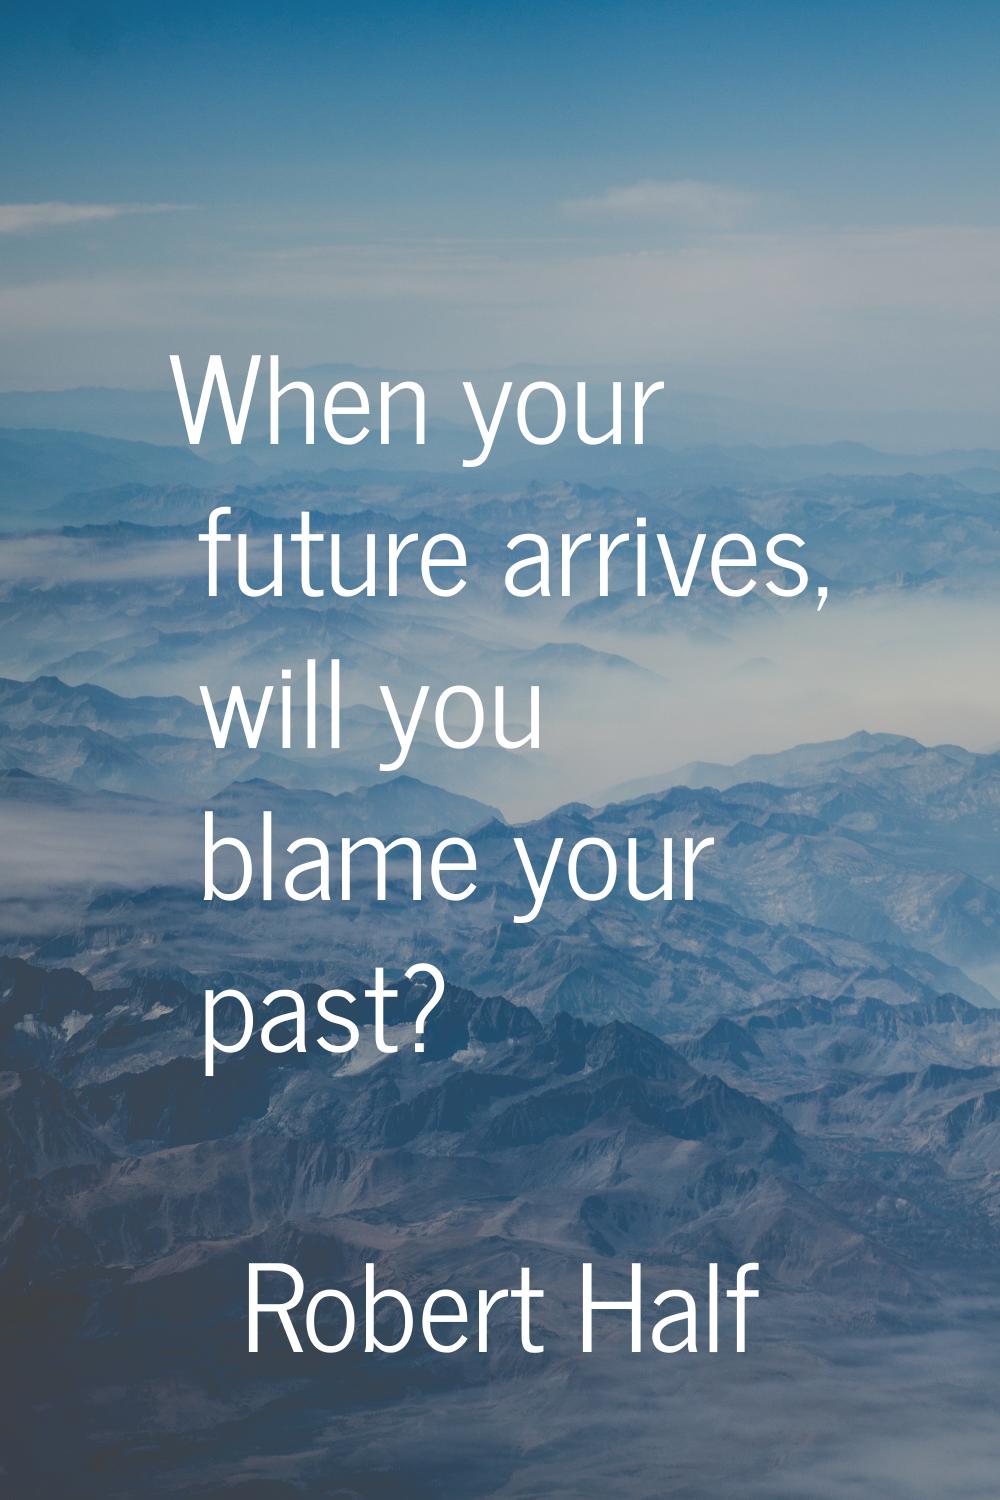 When your future arrives, will you blame your past?